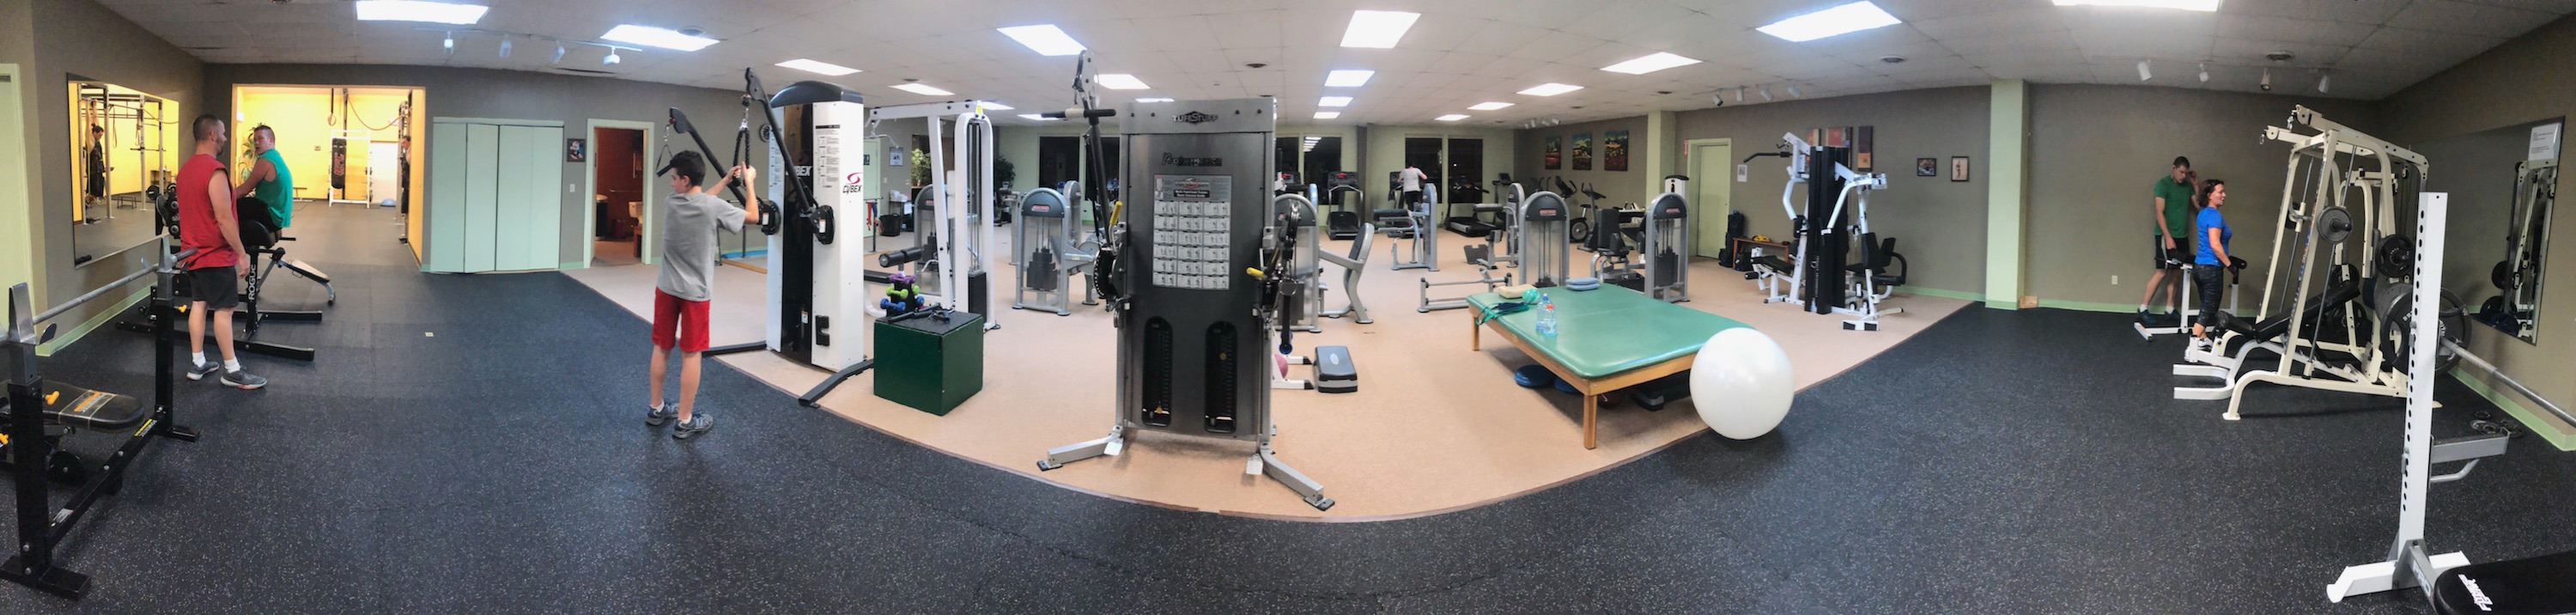 Lakeside Physical Therapy & Fitness Center